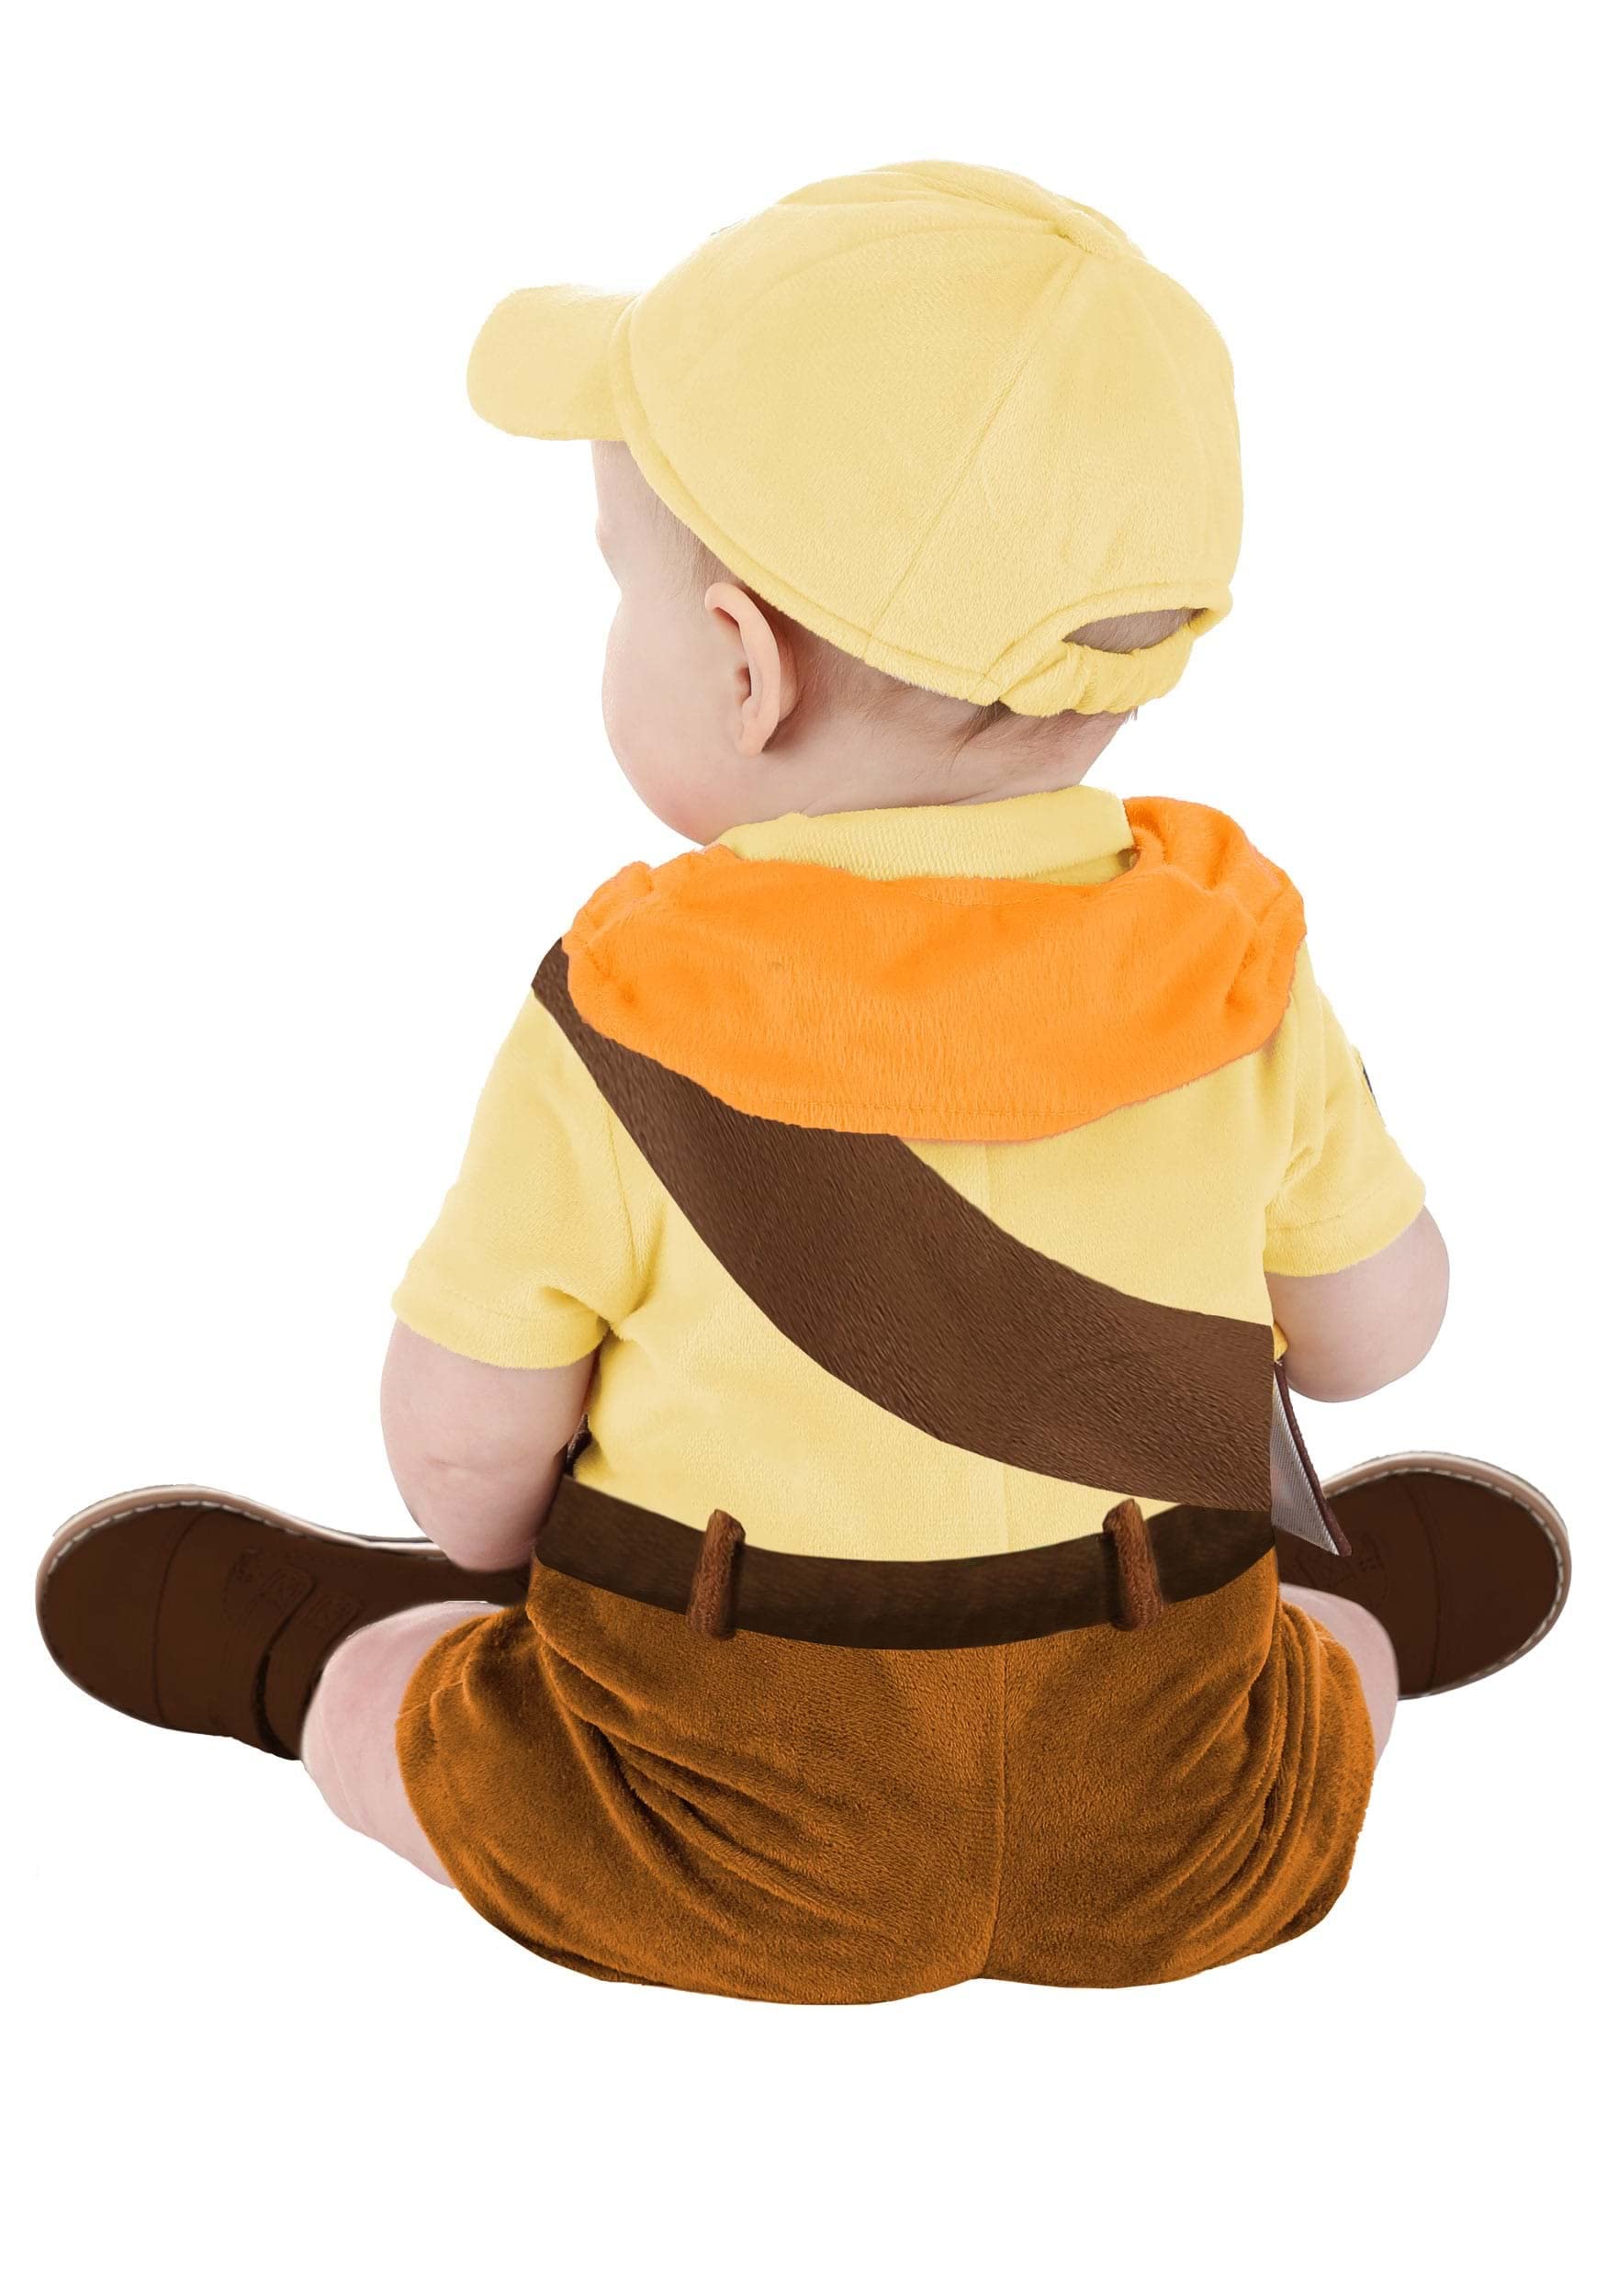 Infant Disney and Pixar Russell Up Costume